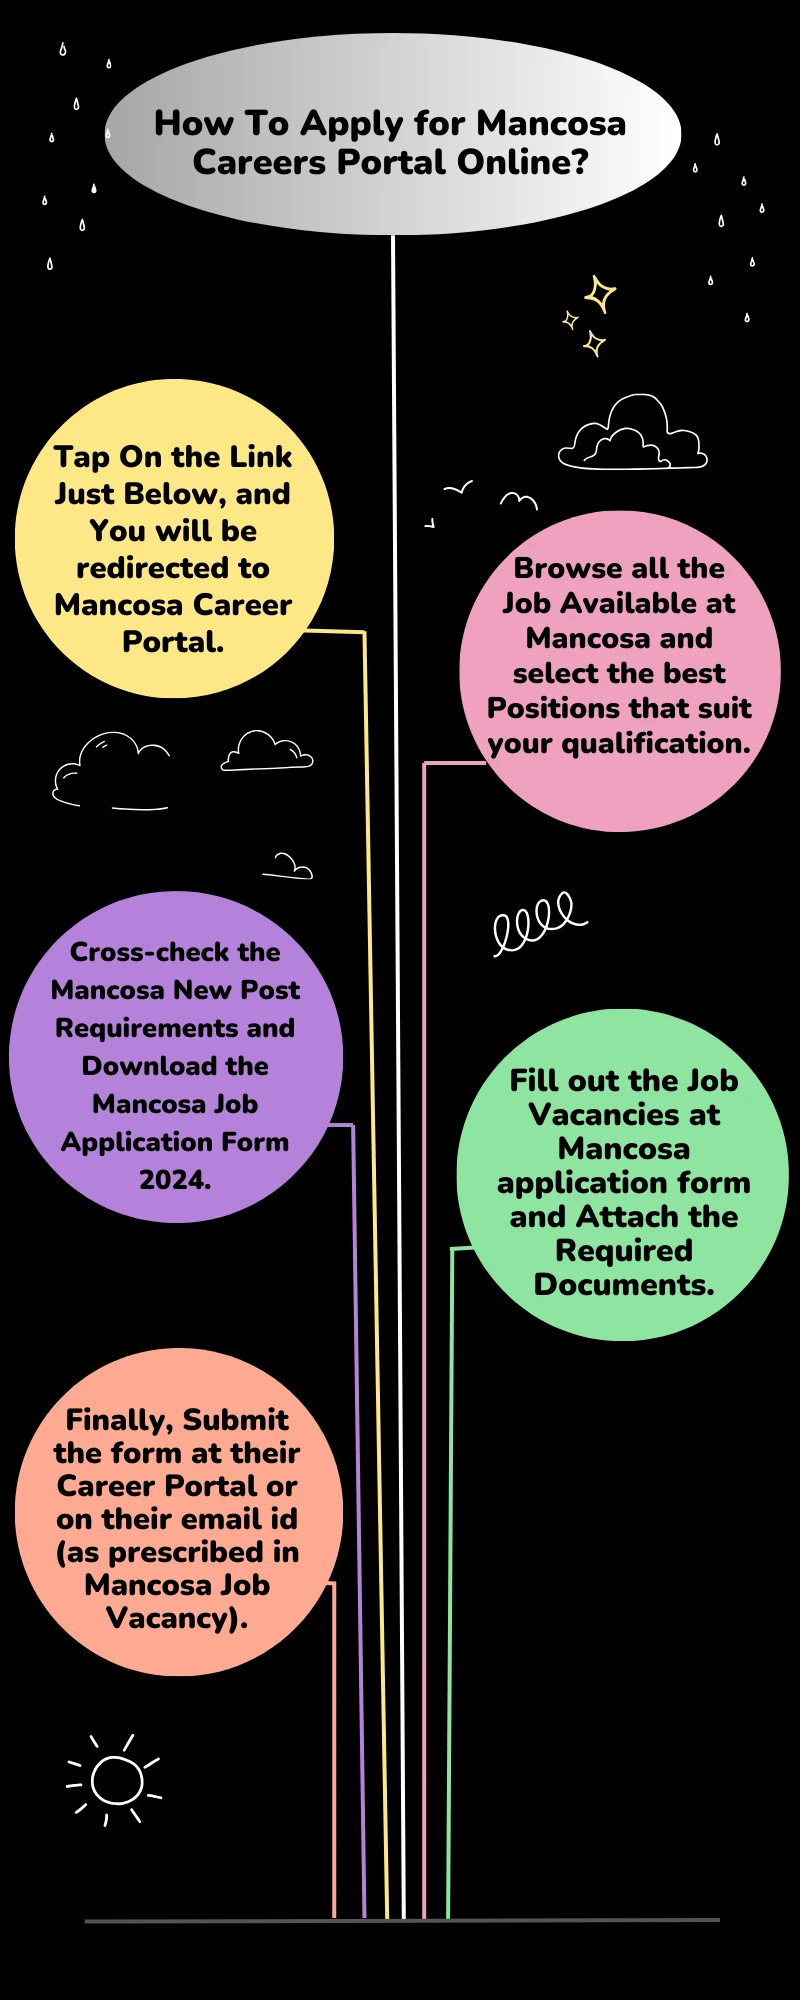 How To Apply for Mancosa Careers Portal Online?